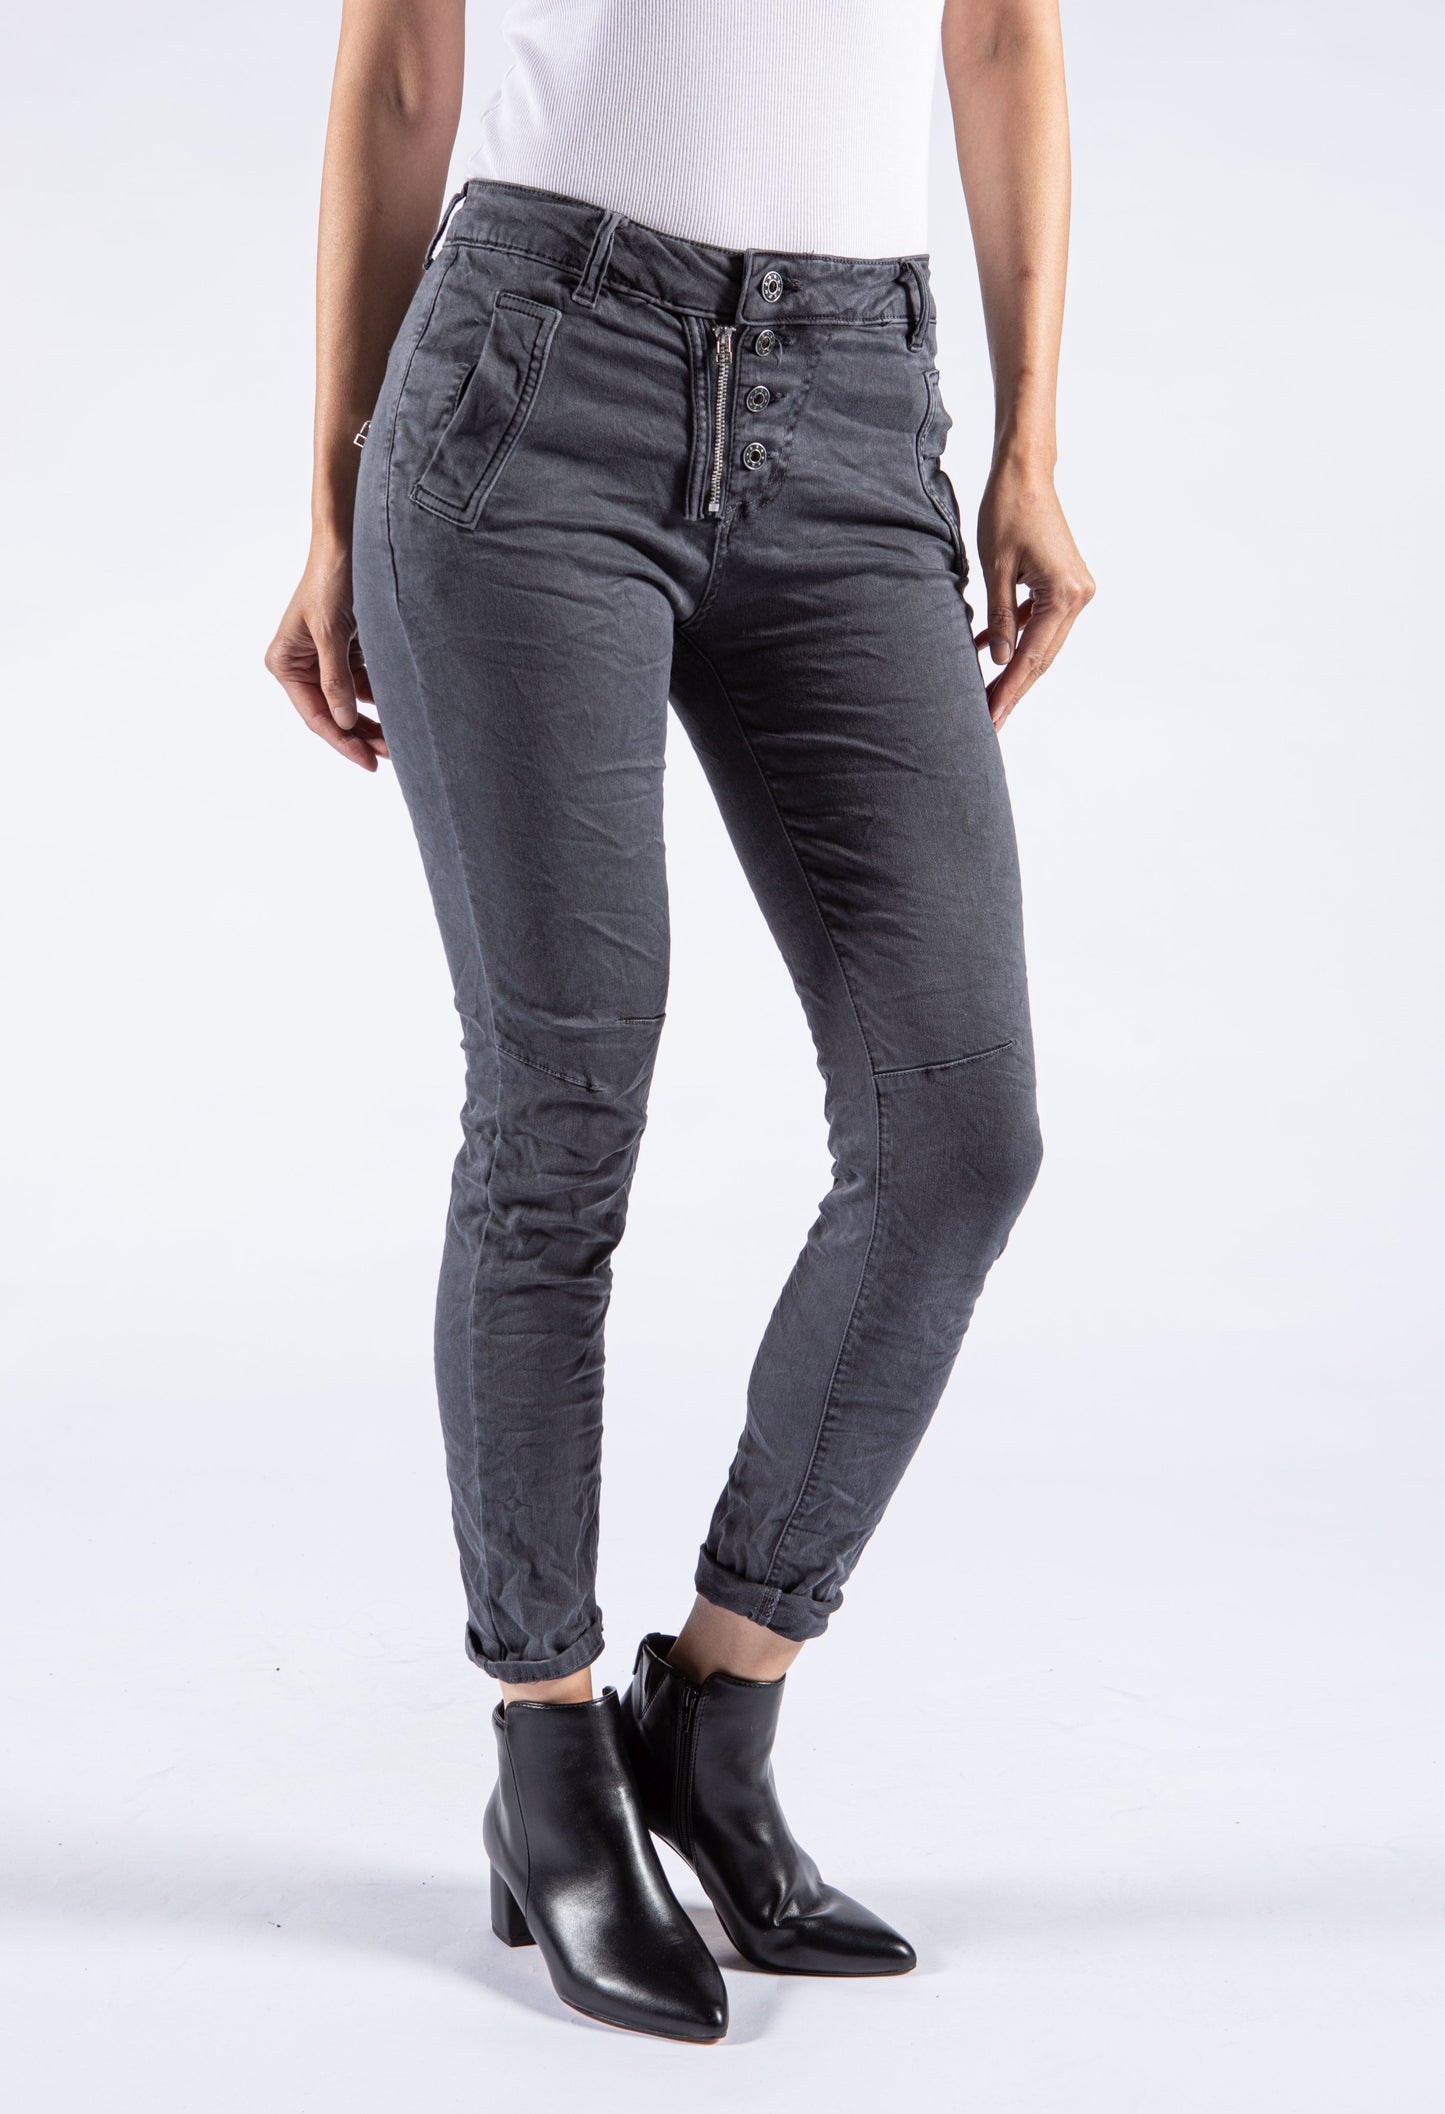 Crinkle Style Jeans